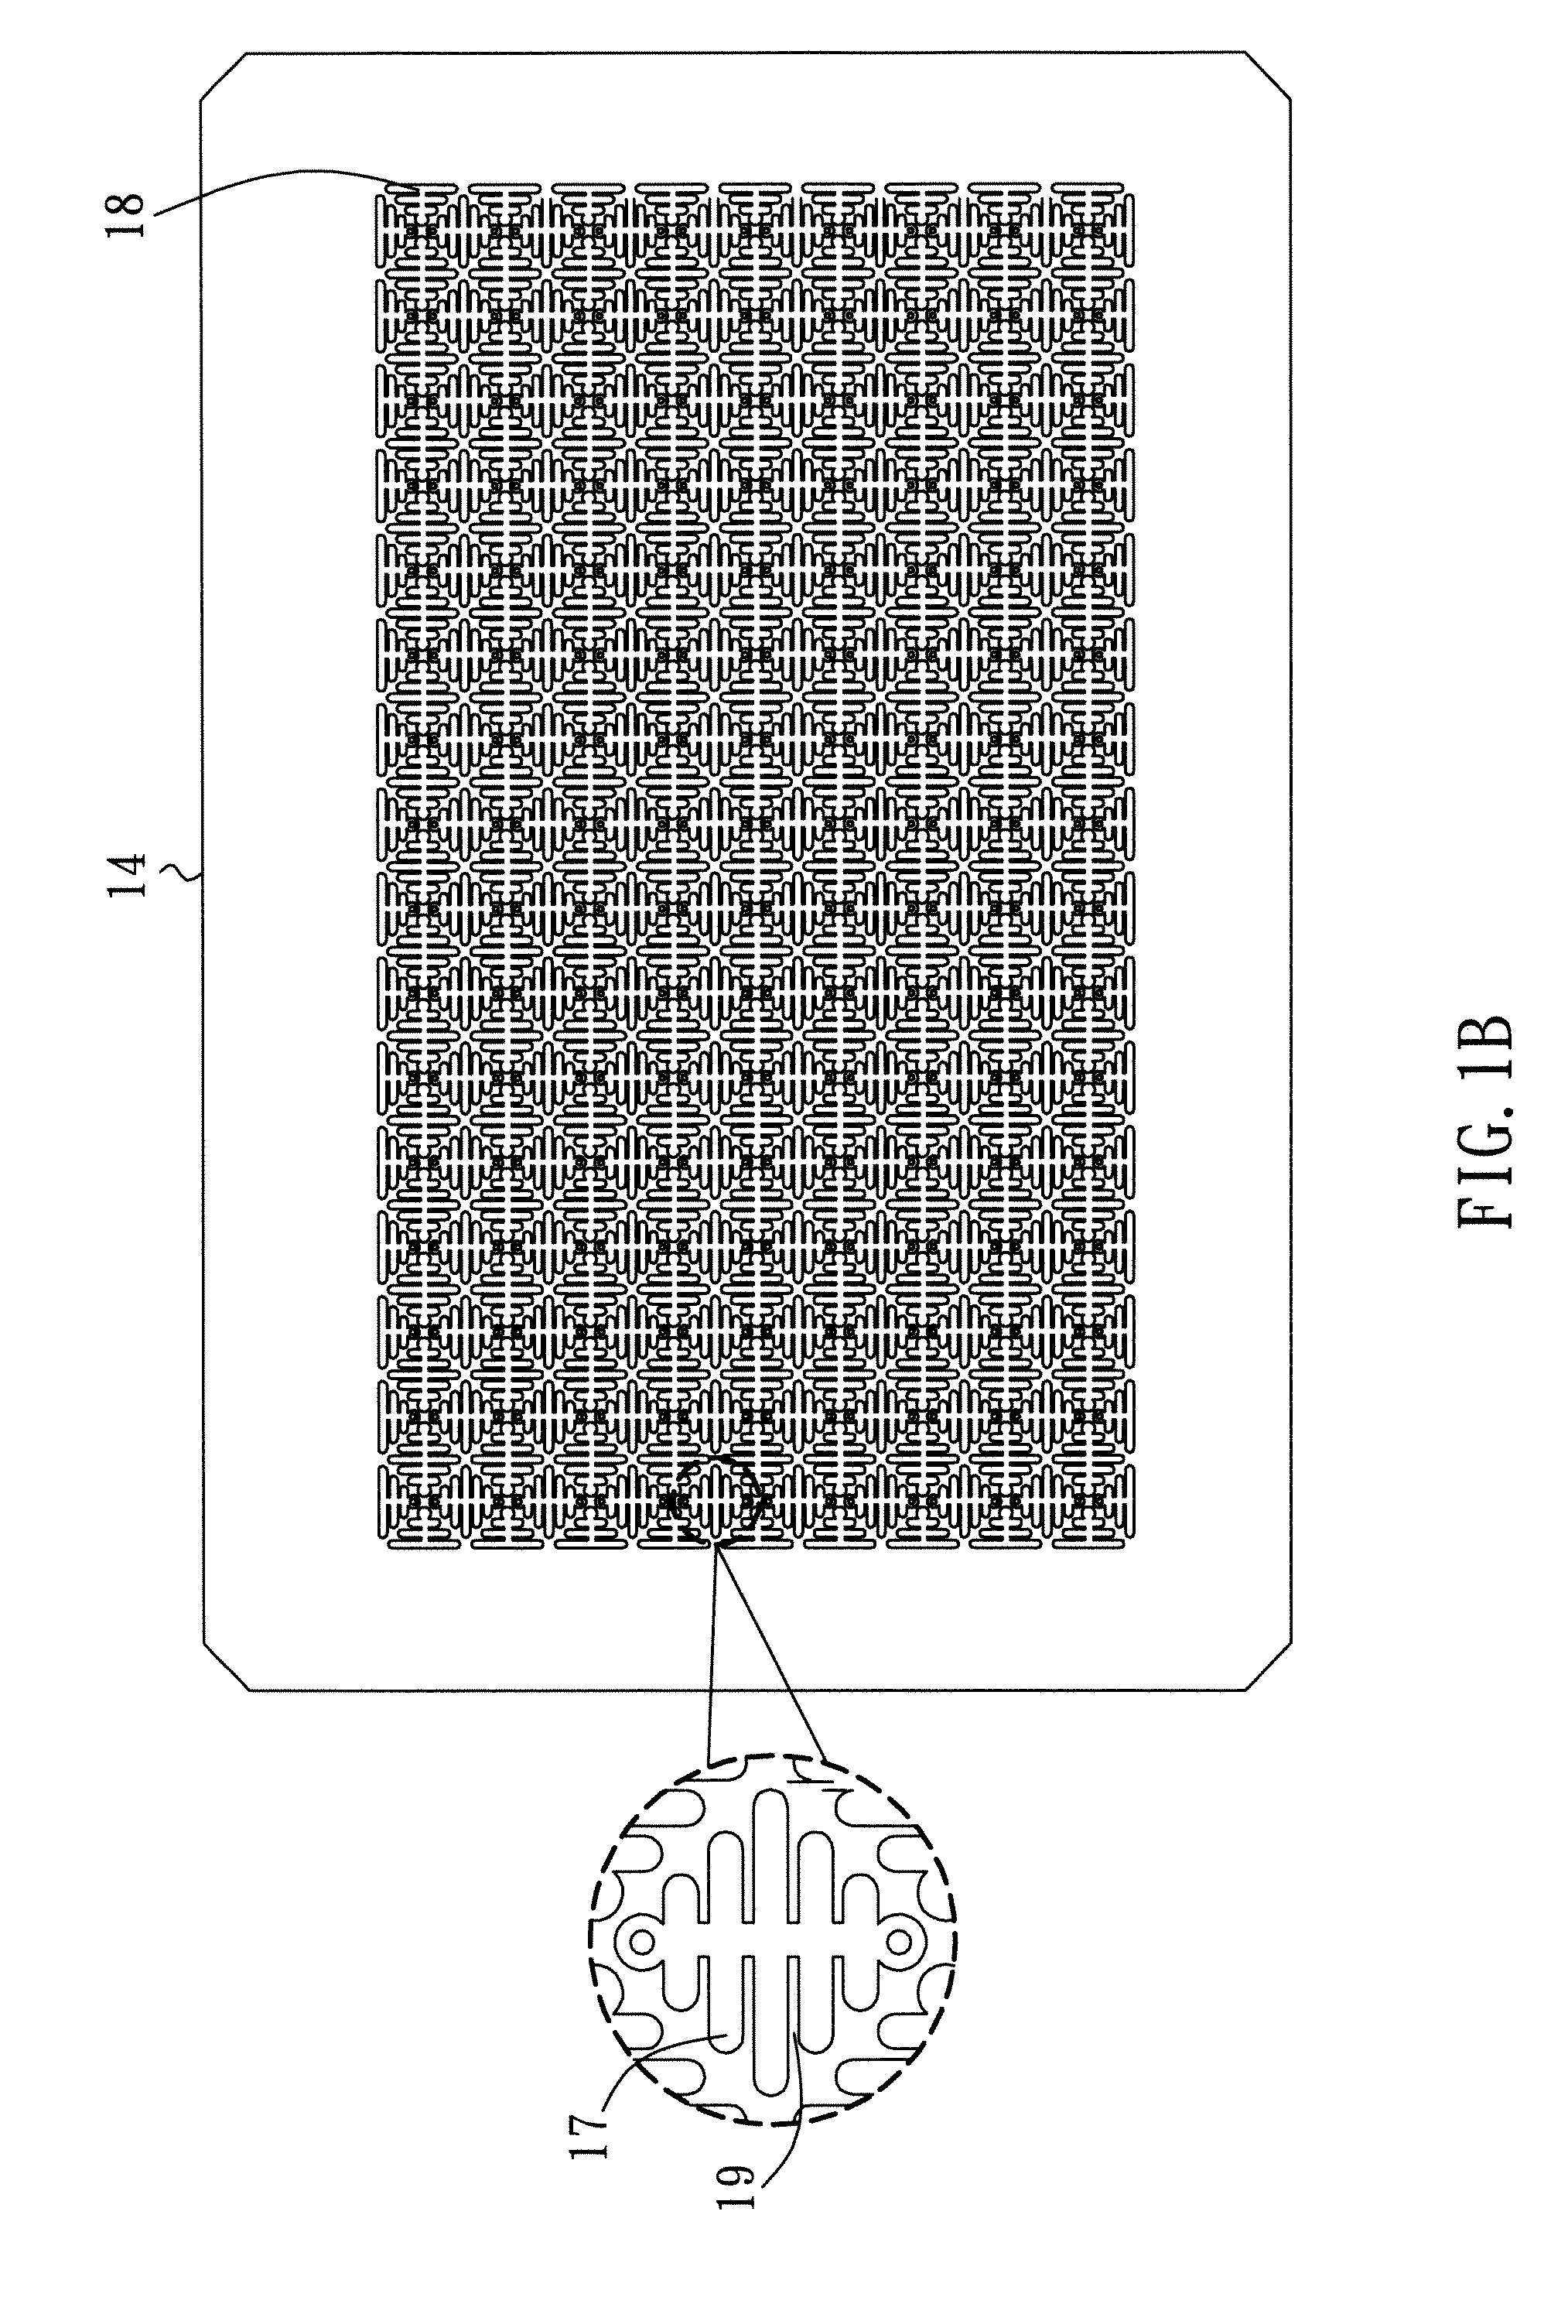 Layout for antenna loops having both functions of capacitance induction and electromagnetic induction